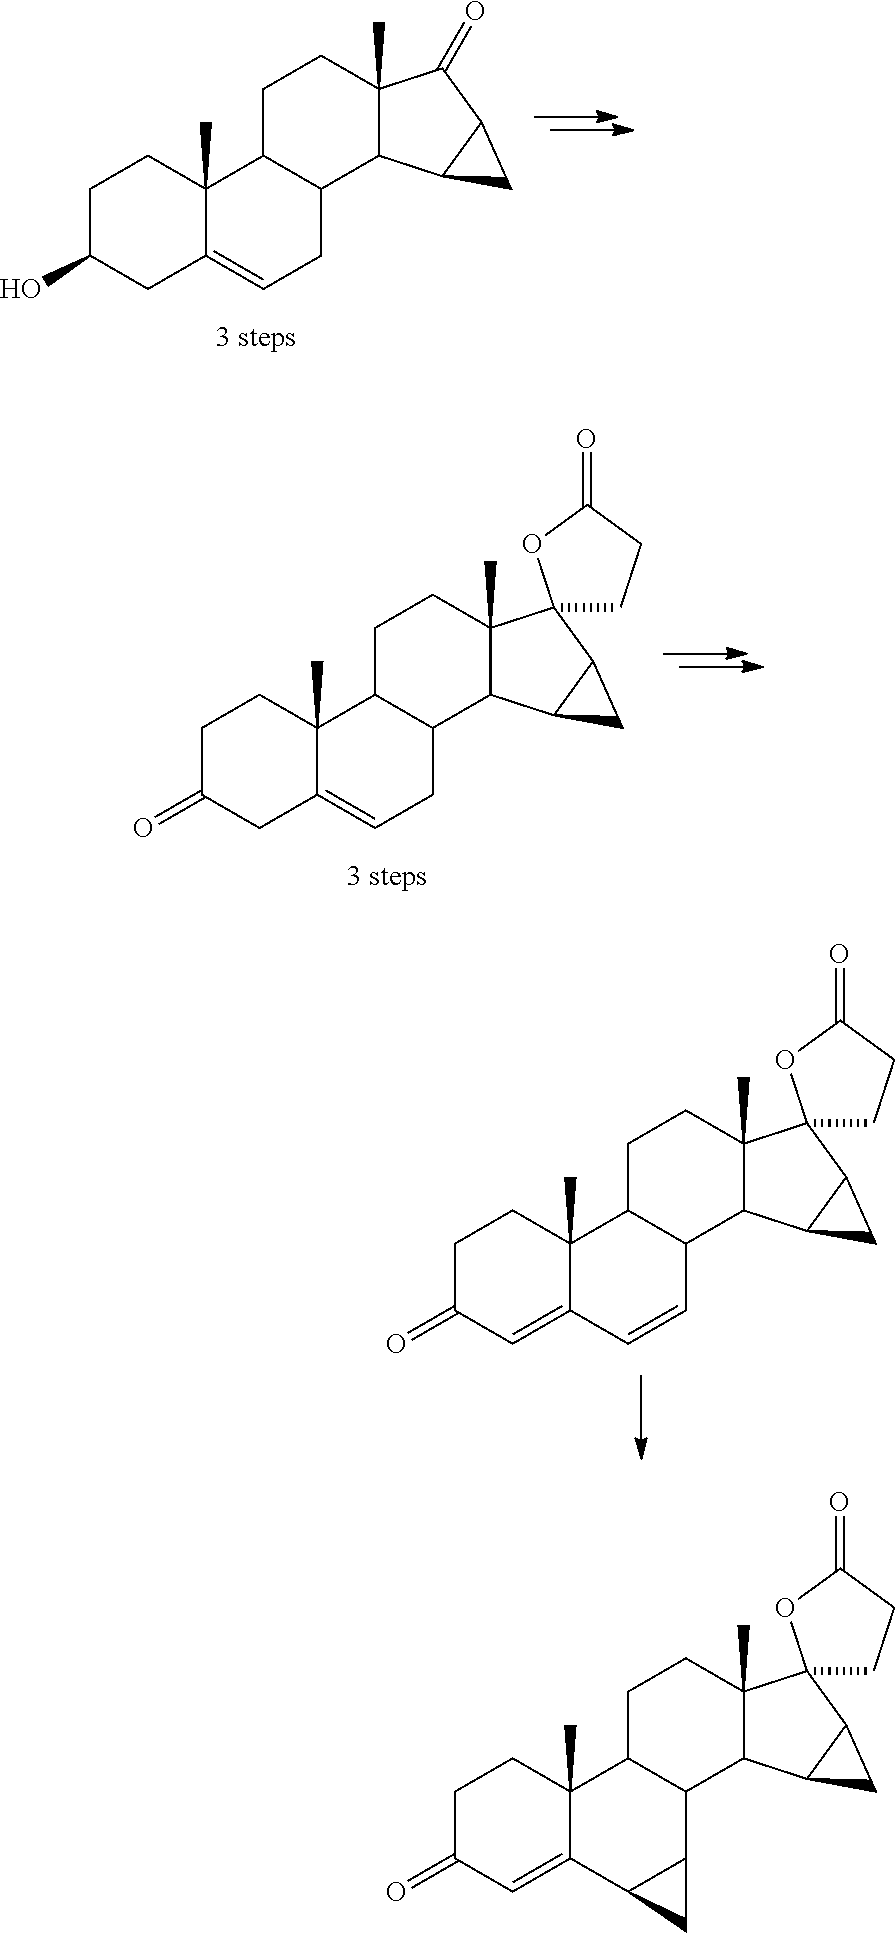 Process for obtaining 17-spirolactones in steroids